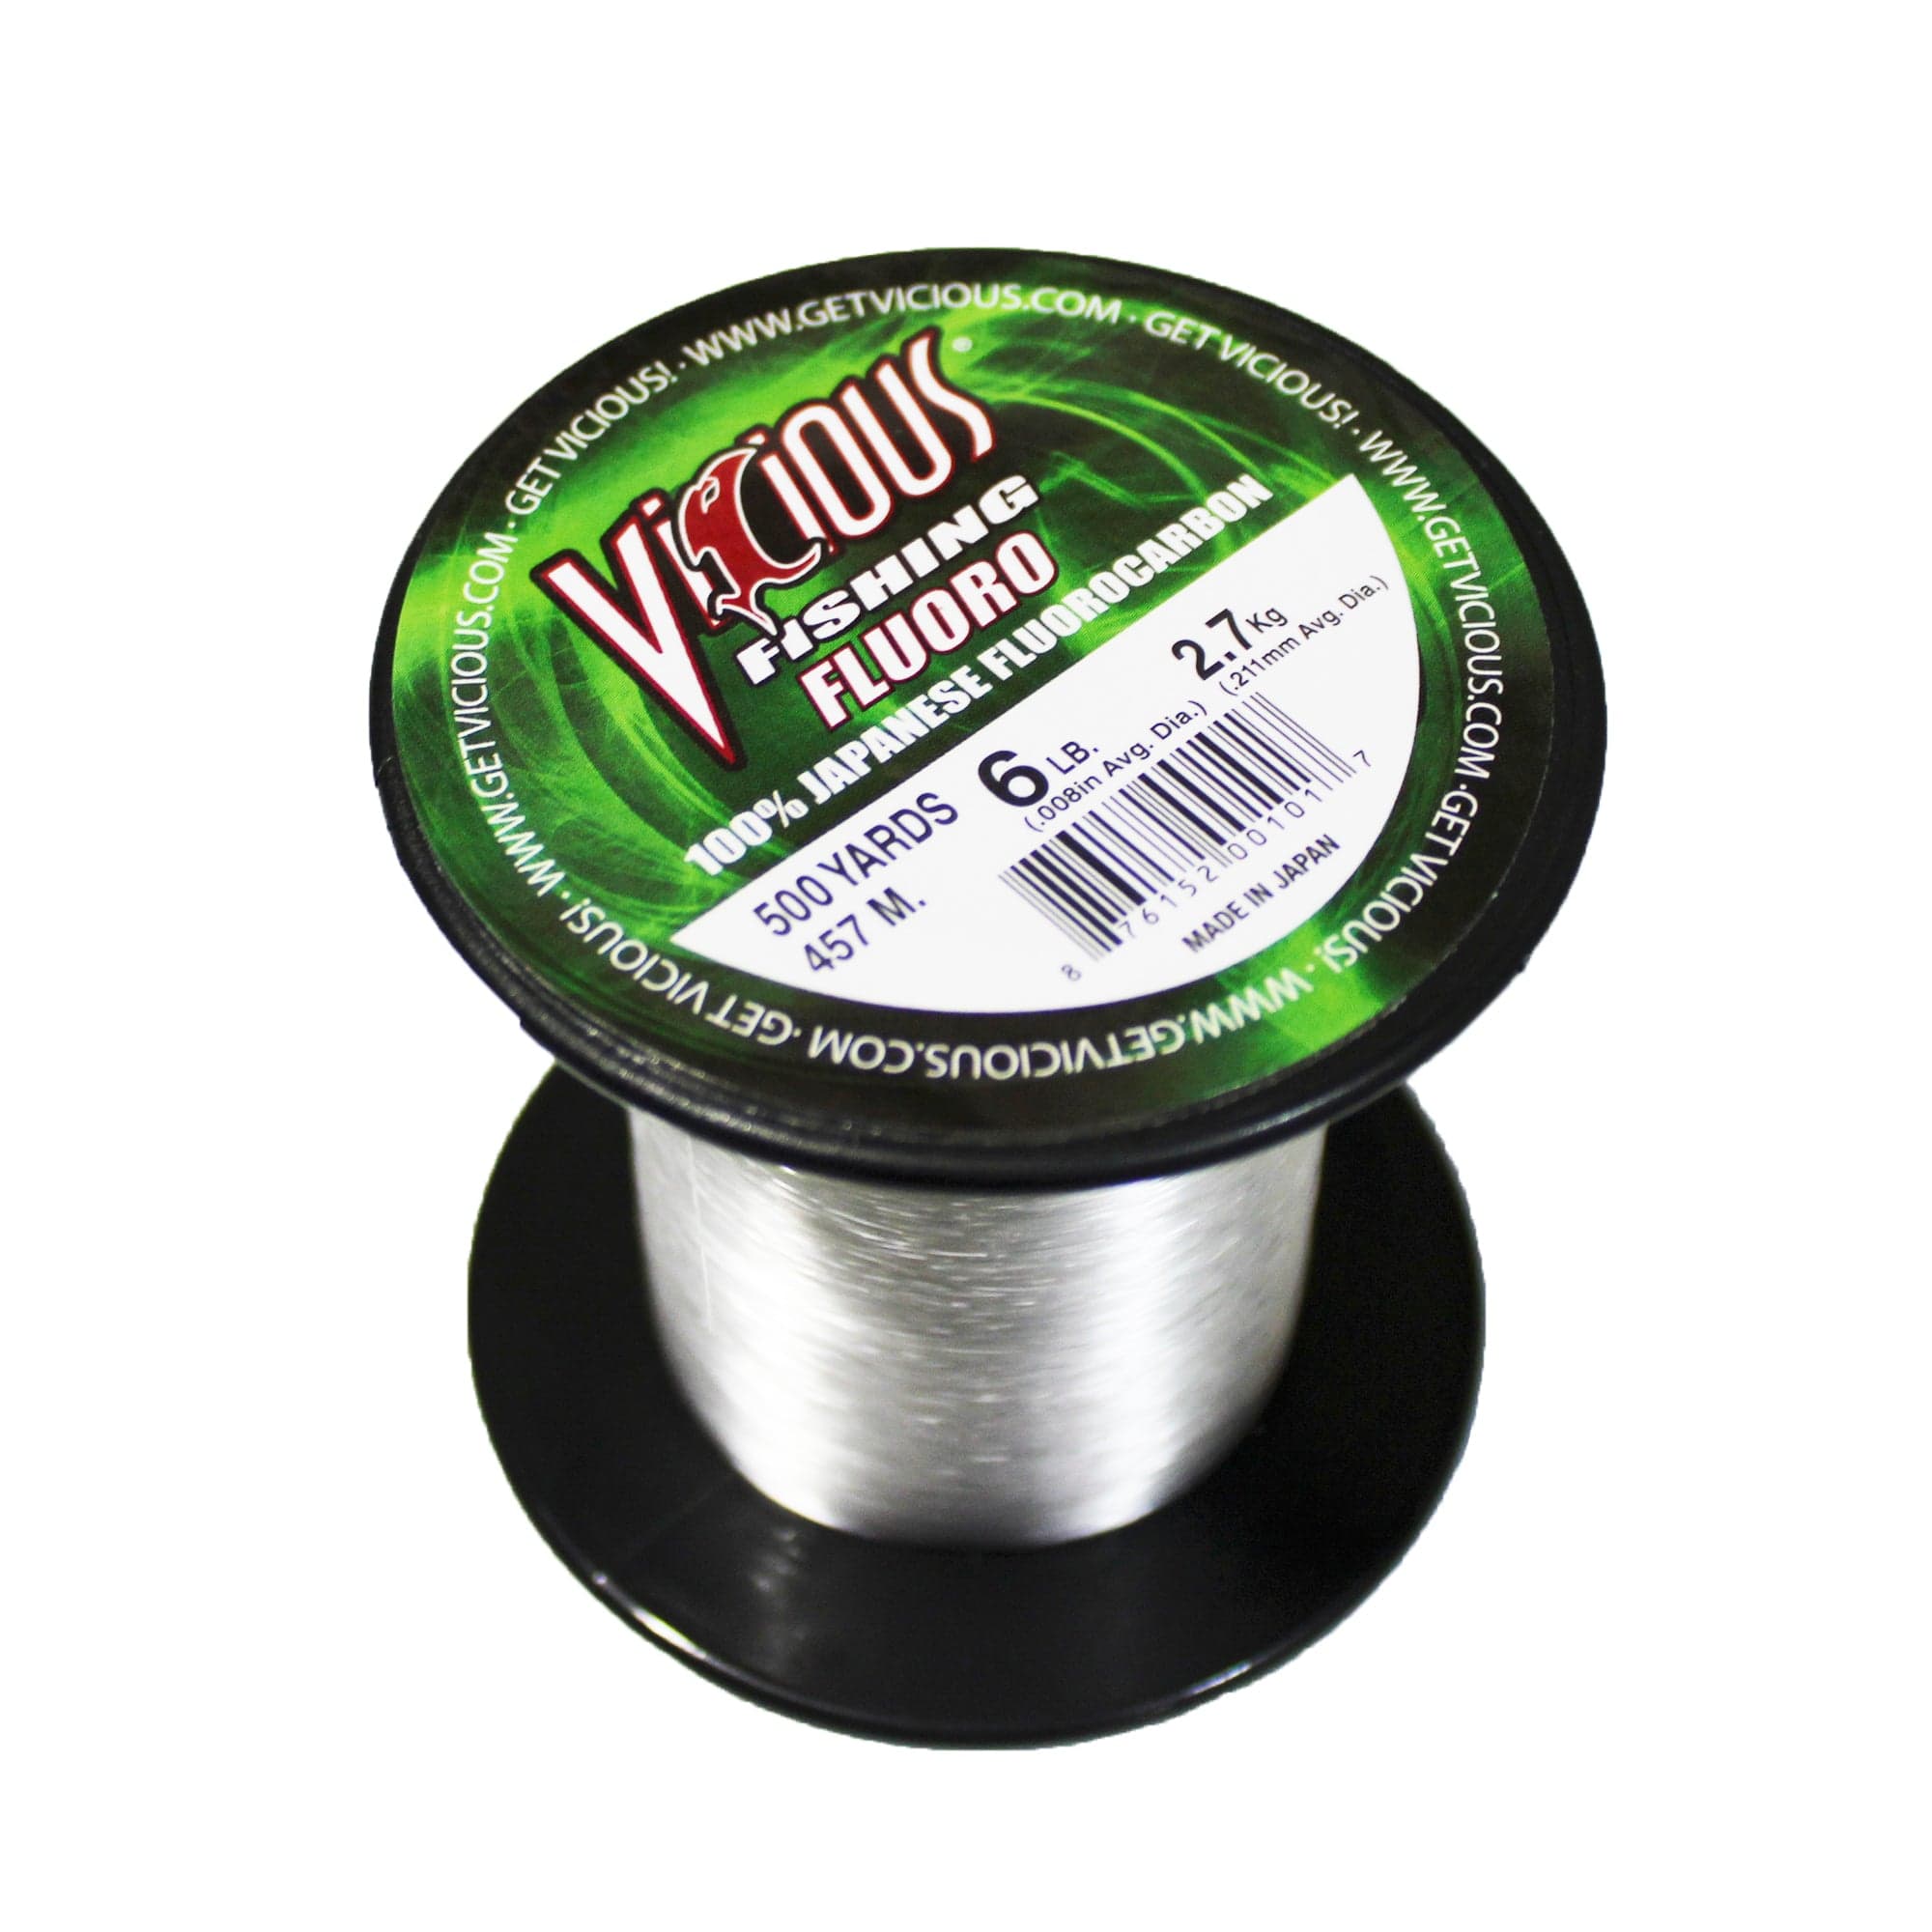 Vicious FLD 100% Fluorocarbon Fishing Line, 500 Yards - Clear